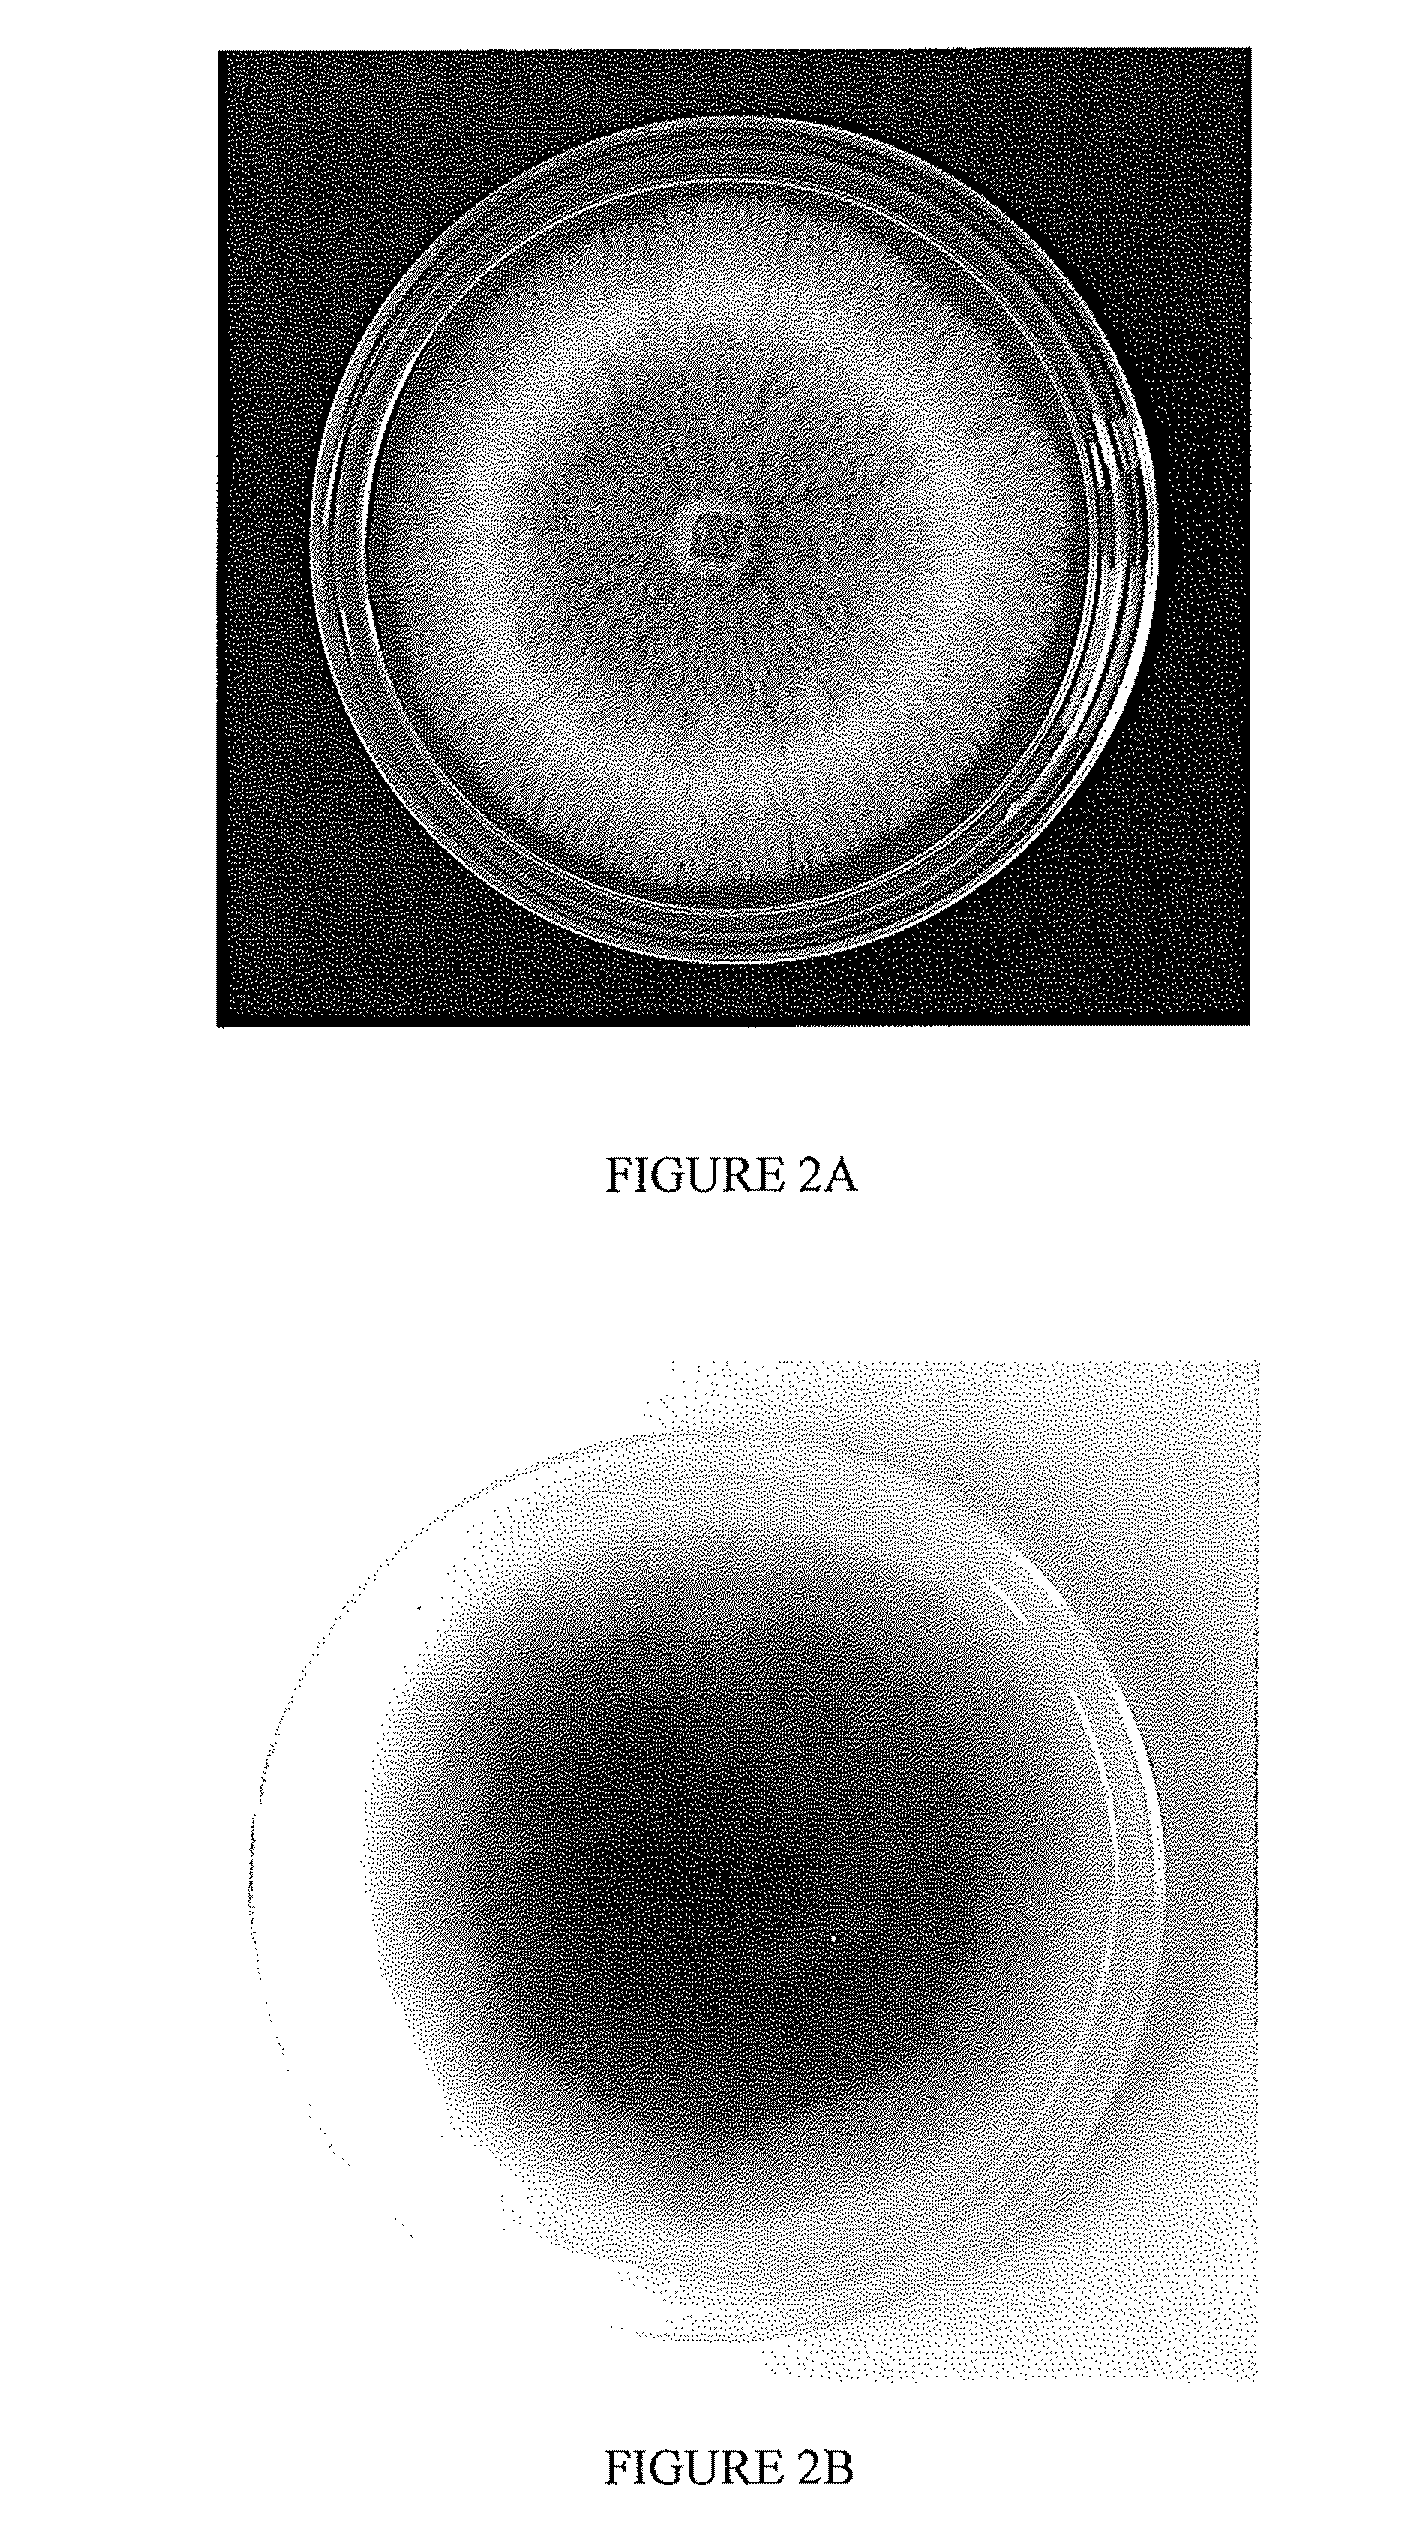 System and Method of Producing Volatile Organic Compounds from Fungi